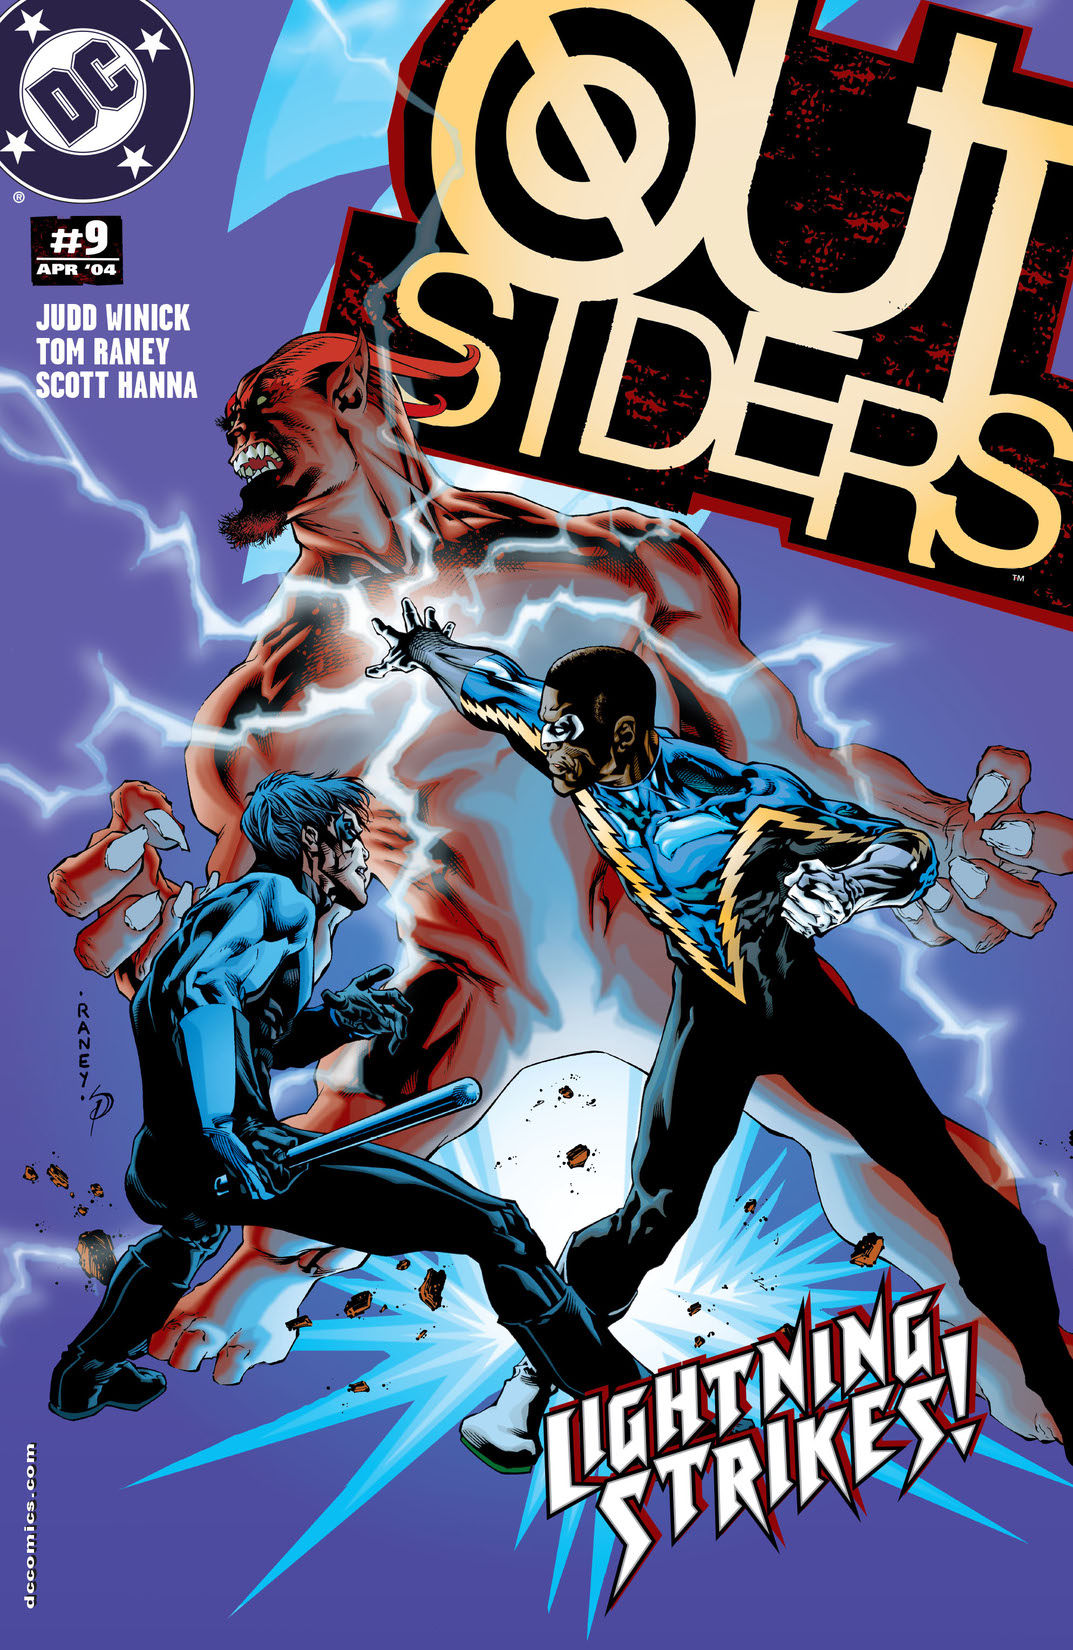 Outsiders (2003-) #9 preview images